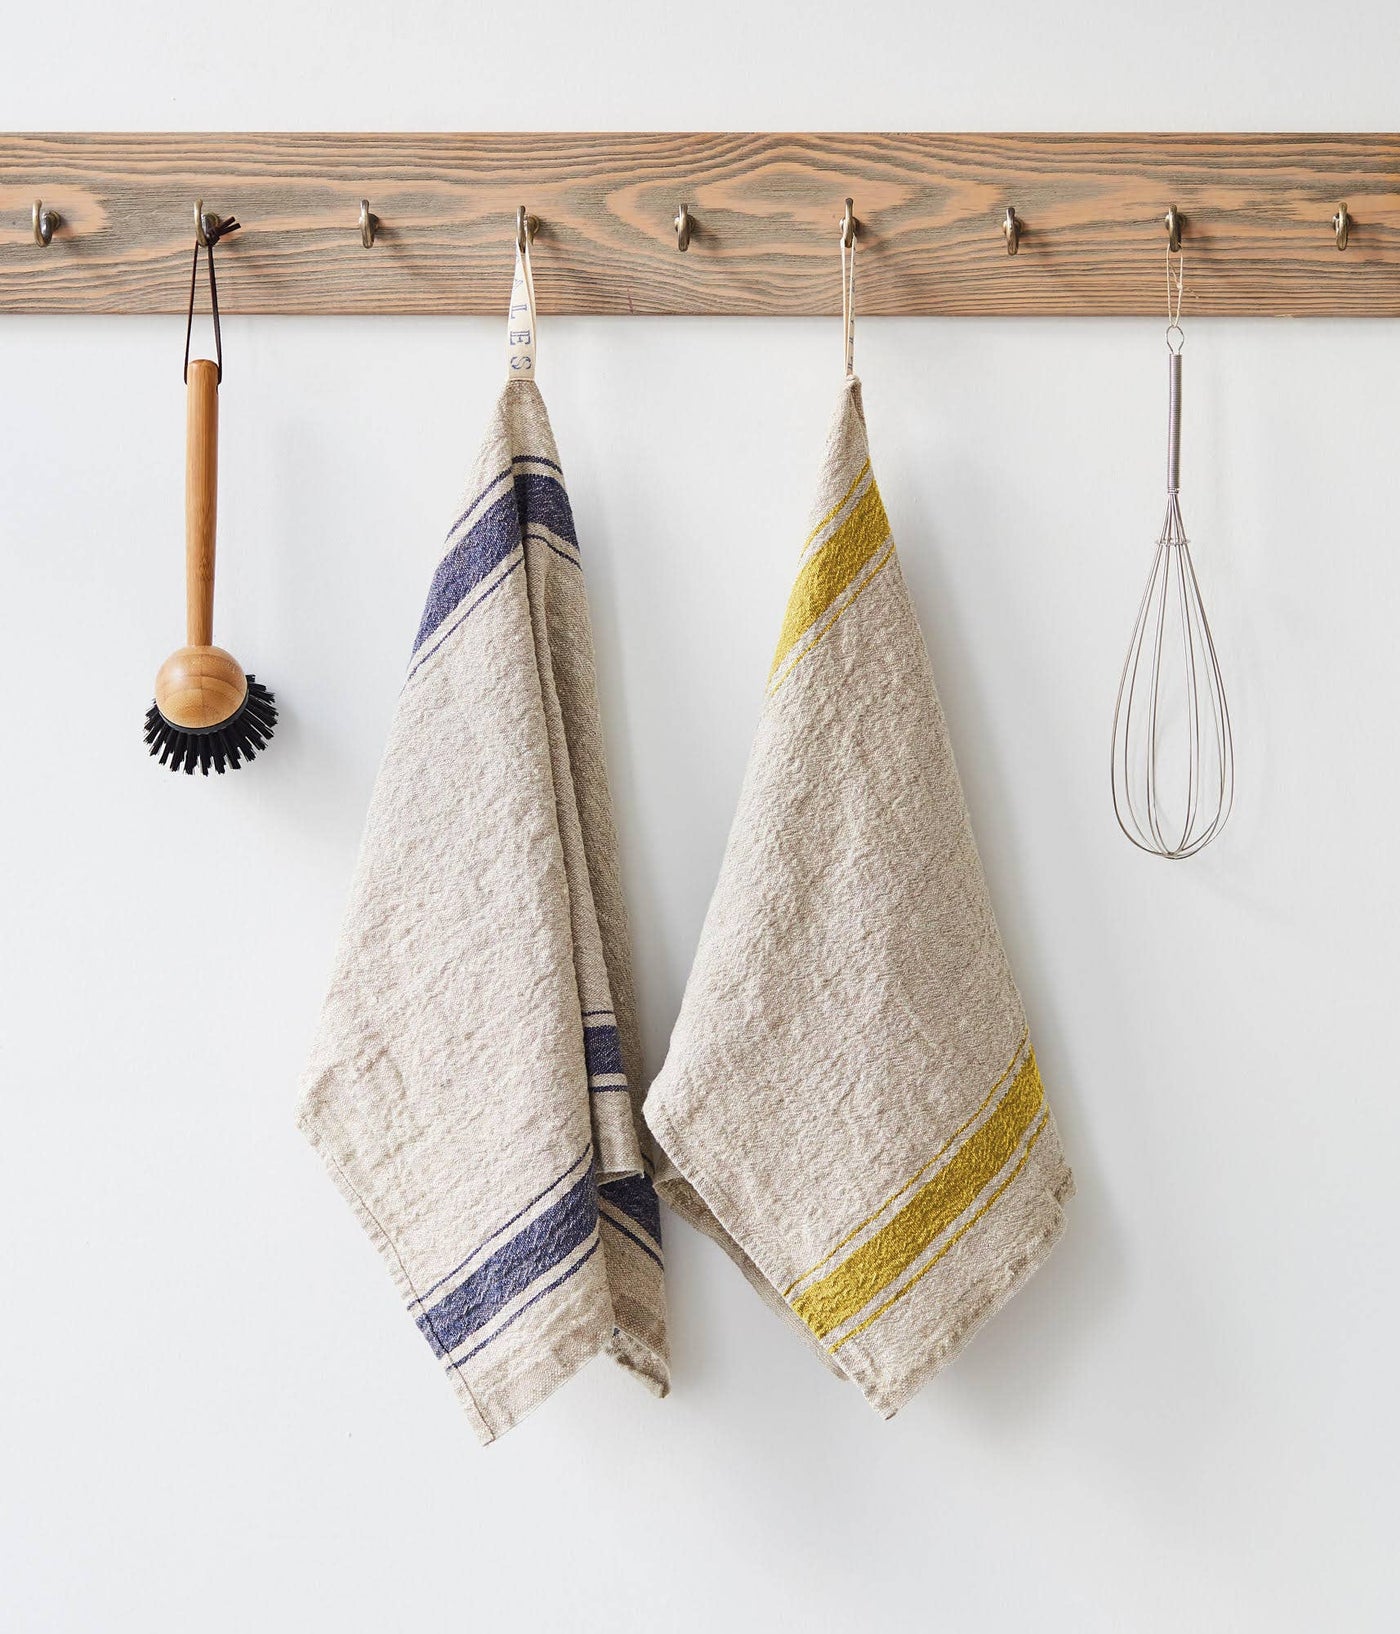  Wovoto Vintage Rustic Dish Towels for Kitchen Drying